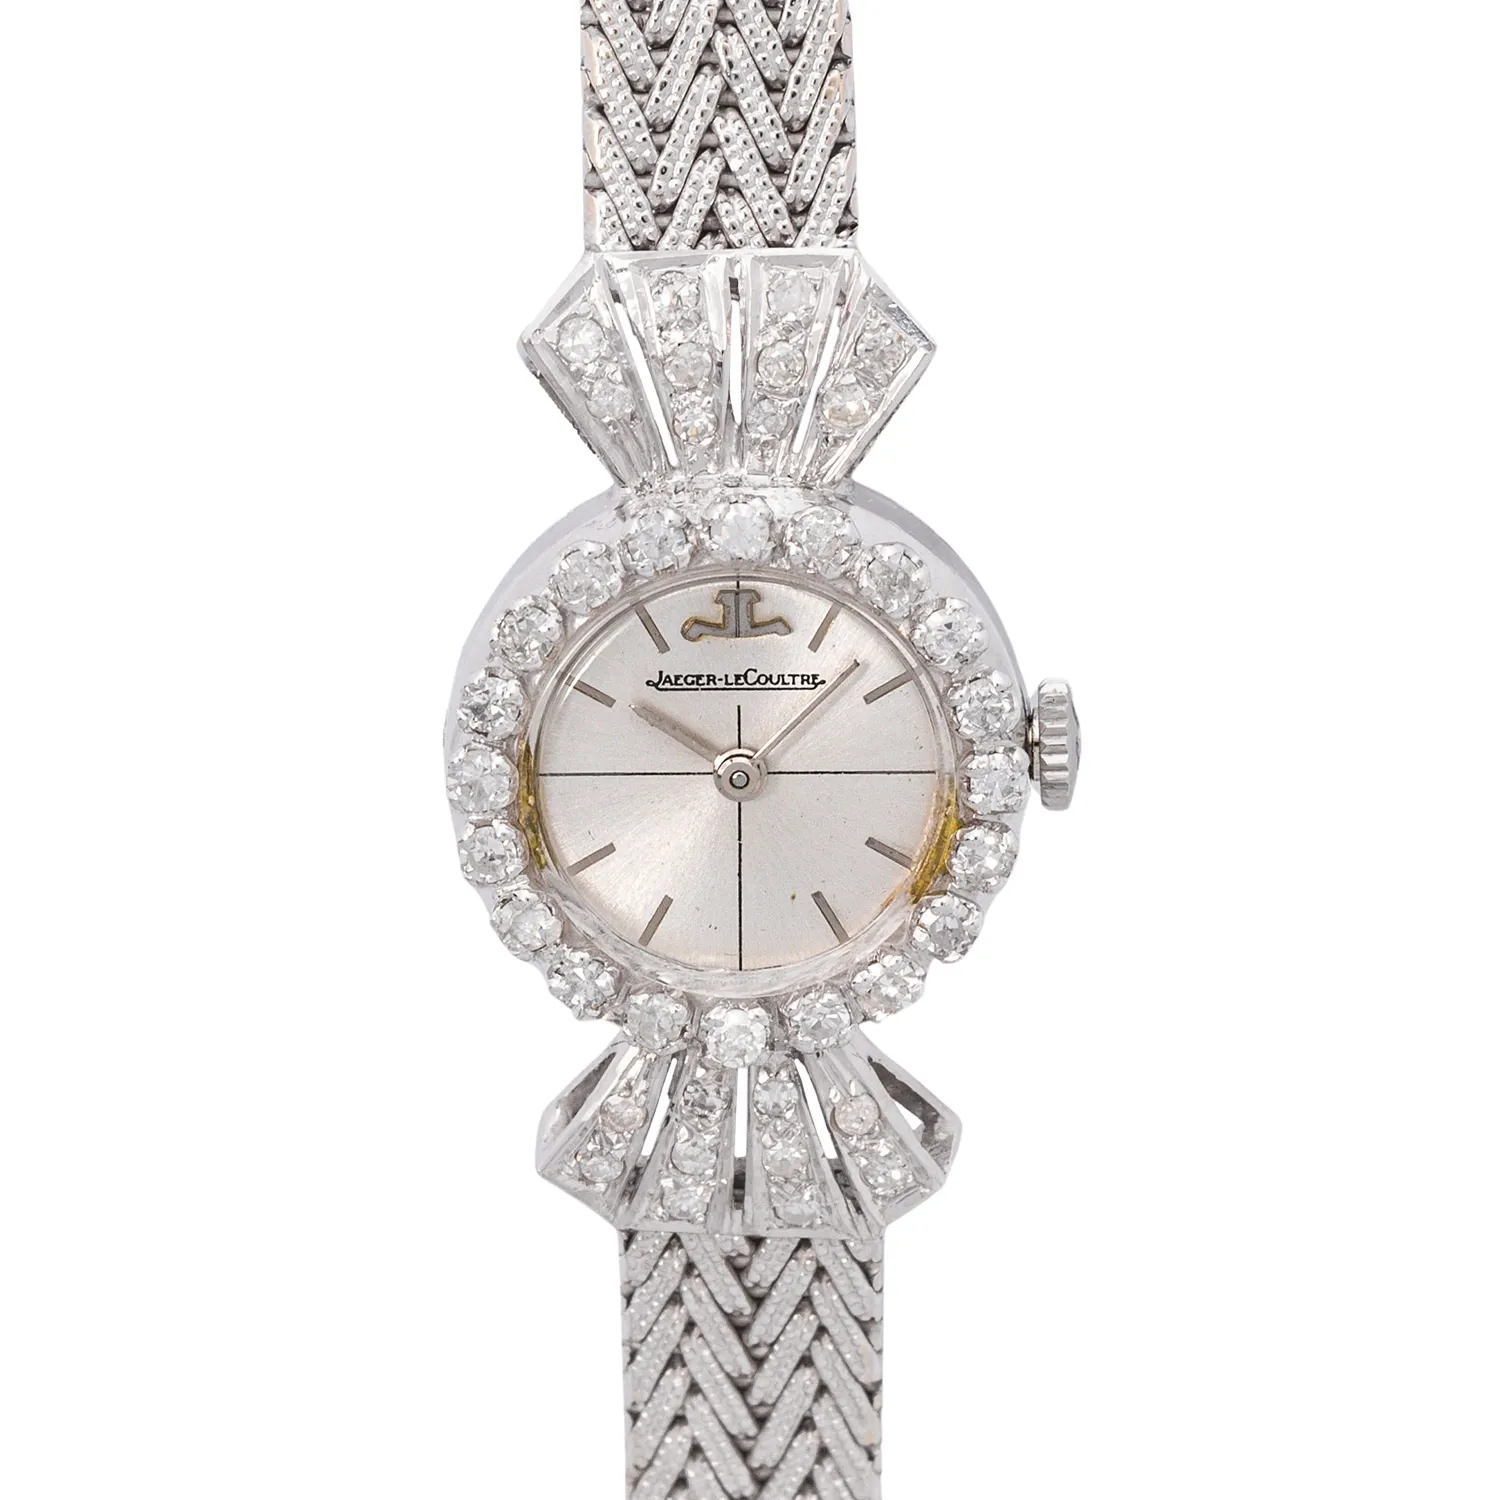 Jaeger-LeCoultre 17mm 18k white gold and diamond-set Silver